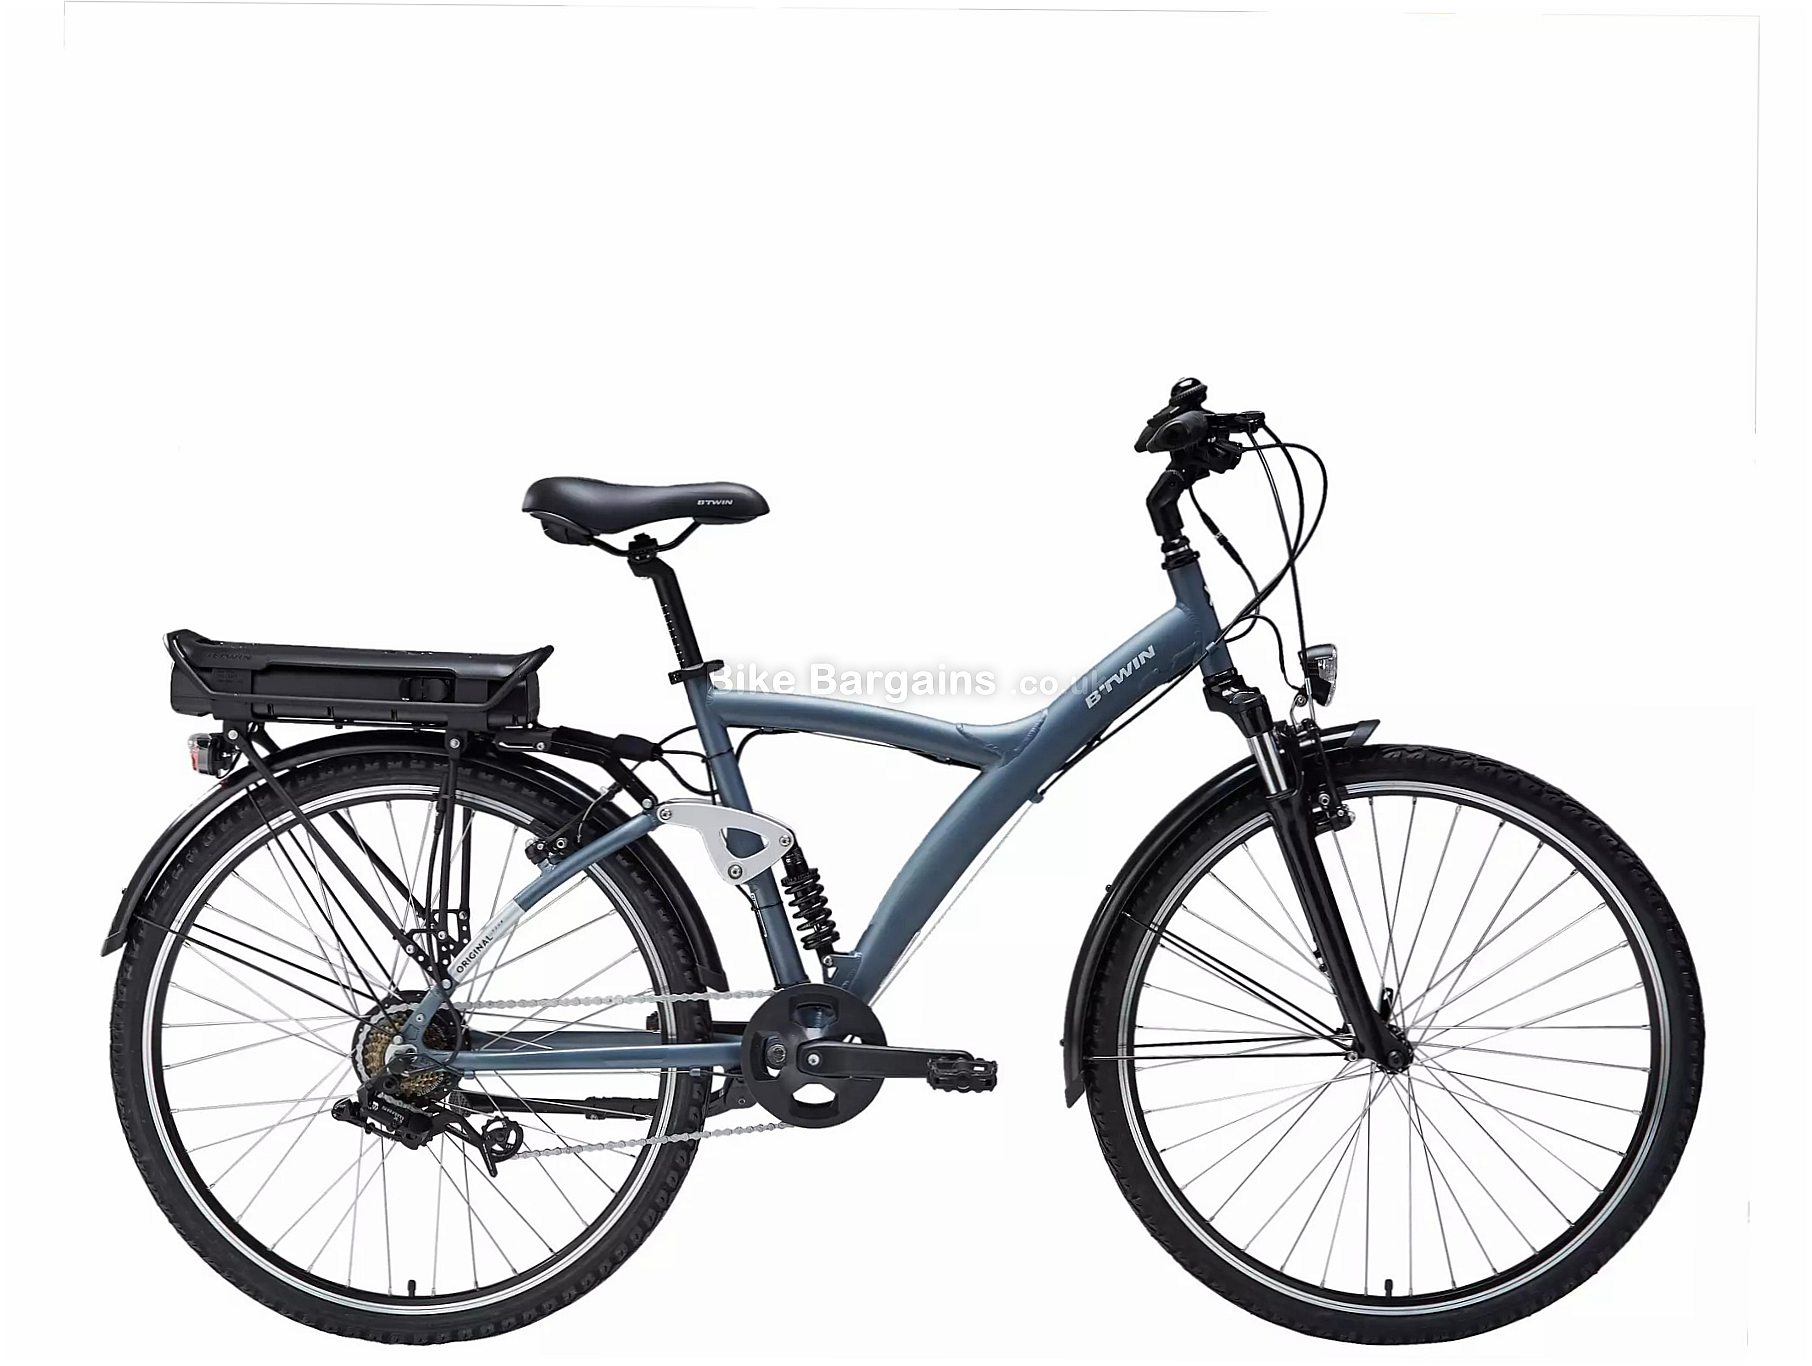 Btwin Bicycle Double Frame Bag Buy Online At Best Price On Snapdeal